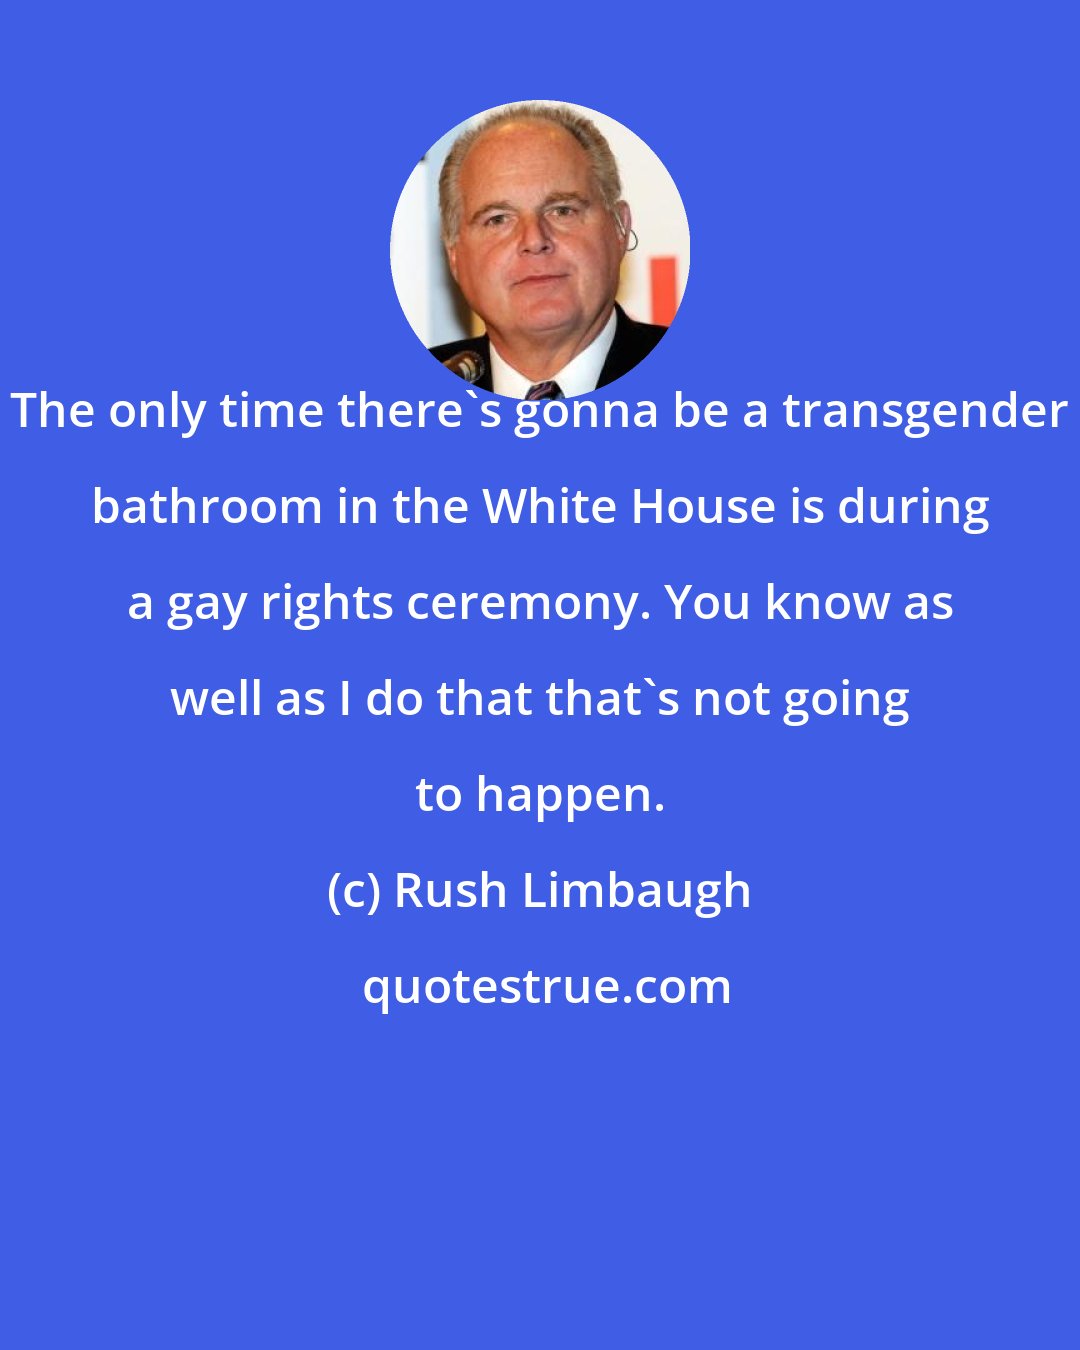 Rush Limbaugh: The only time there's gonna be a transgender bathroom in the White House is during a gay rights ceremony. You know as well as I do that that's not going to happen.